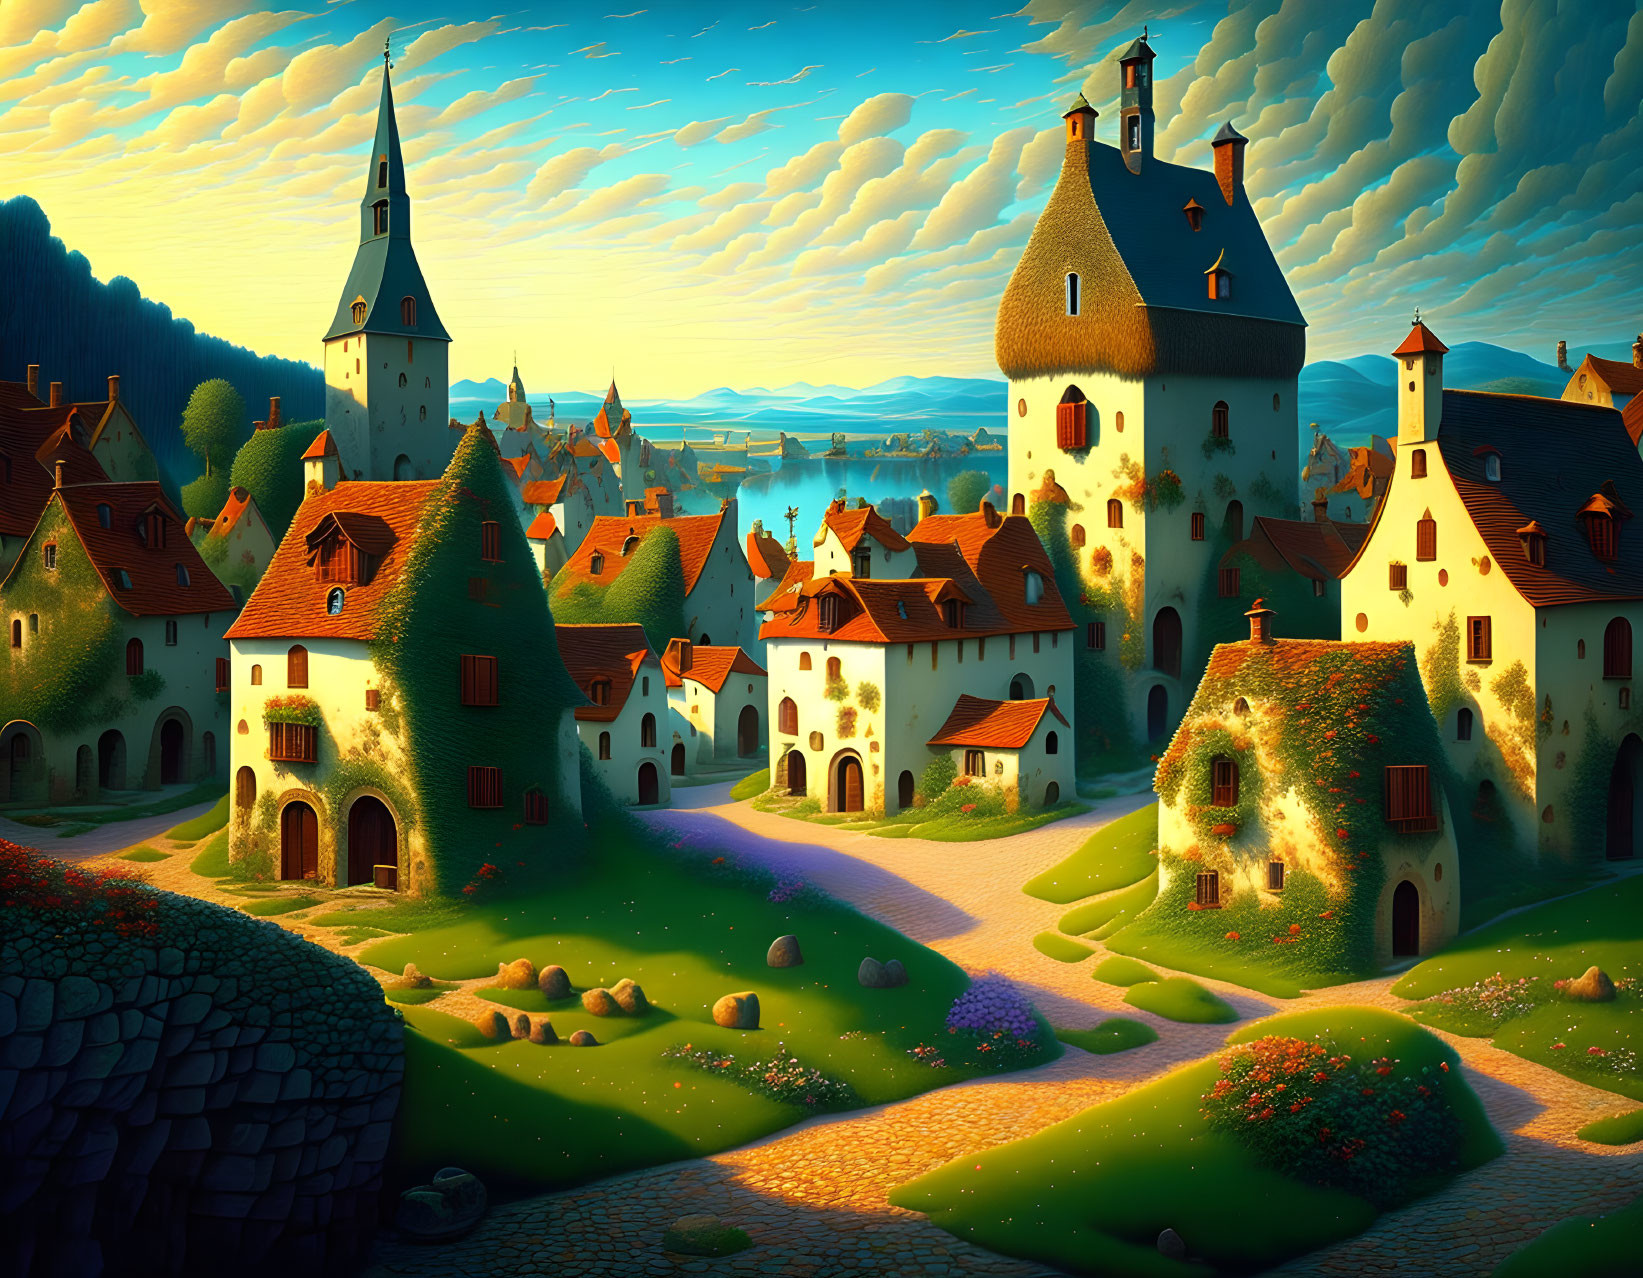 Whimsical fantasy village with castle, church tower, and quaint houses